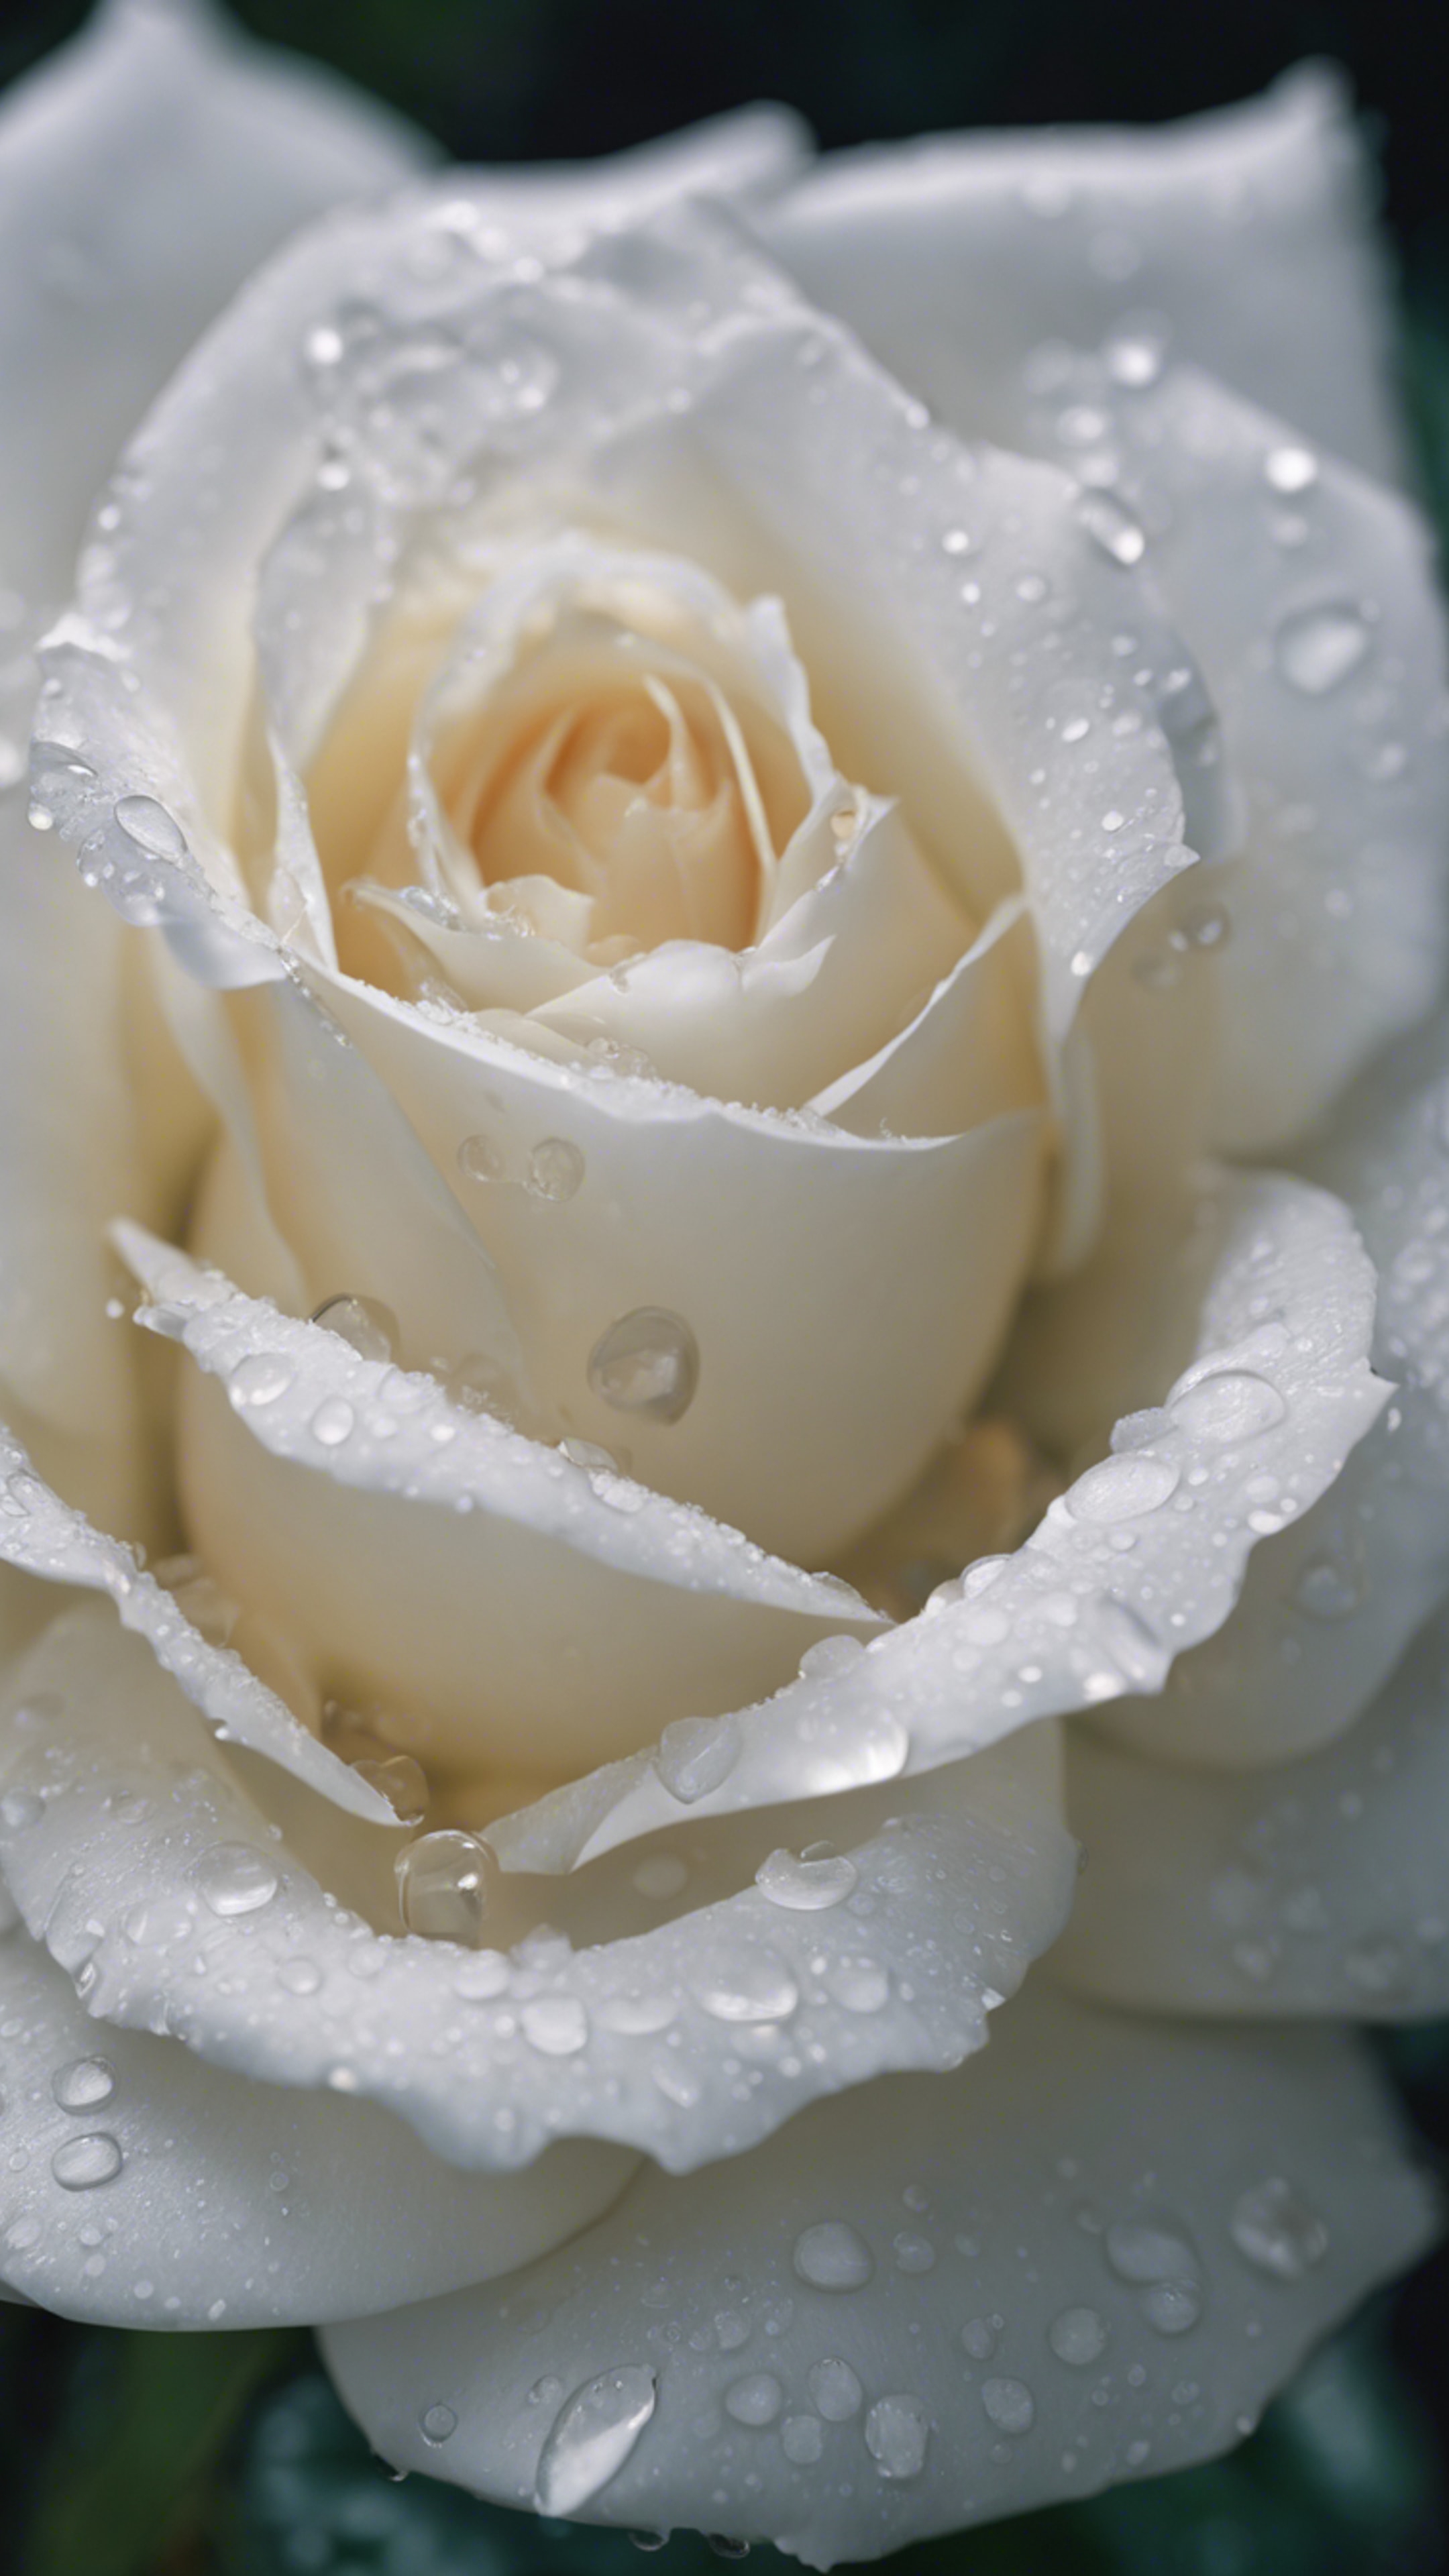 Close-up of a white rose in full bloom, a droplet of water hanging off one petal. Papel de parede[2daa22f287134494a68f]